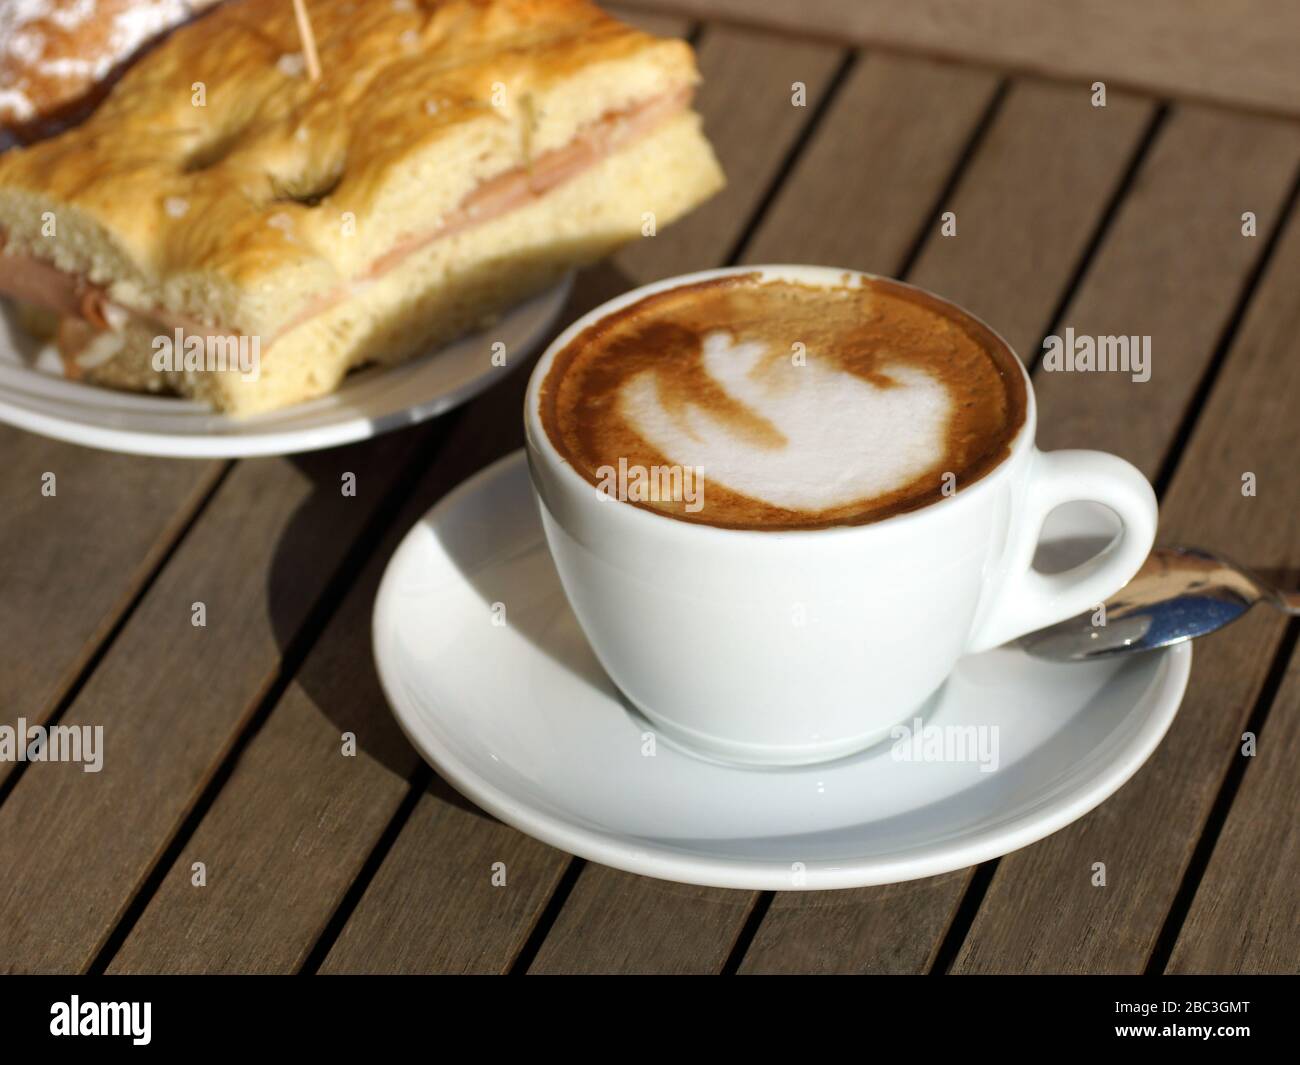 Wonderful traditional Italian breakfast in an open-air café. Delicious hot Italian cappuccino stands in a cup with a saucer on a wooden table. Stock Photo